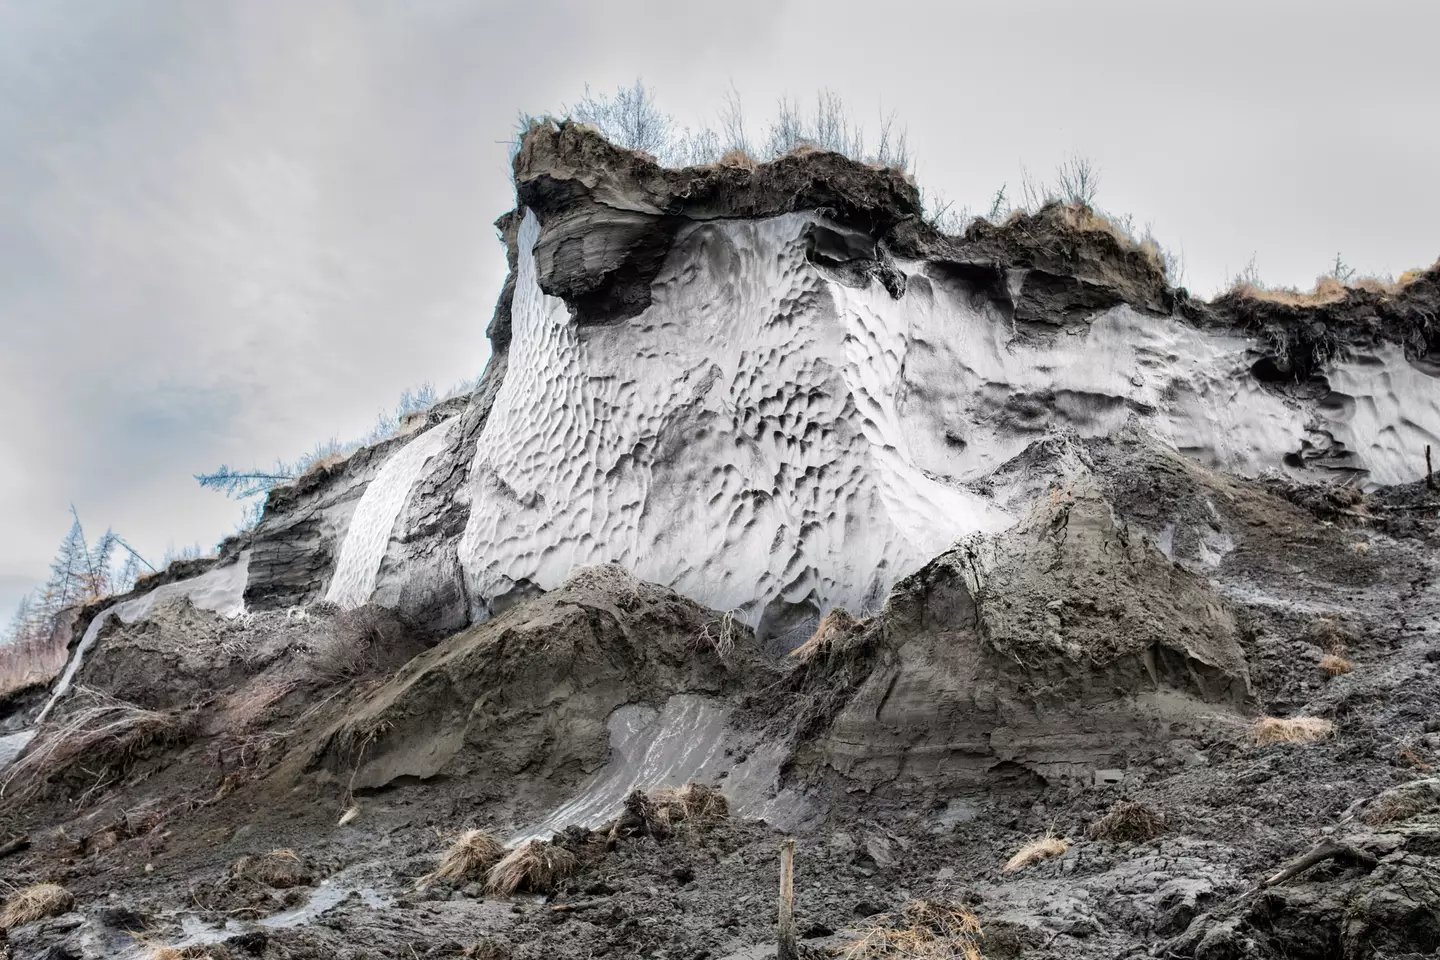 About 65% of the Russian territory is underlain by permafrost (imageBROKER/Florian Bachmeier)